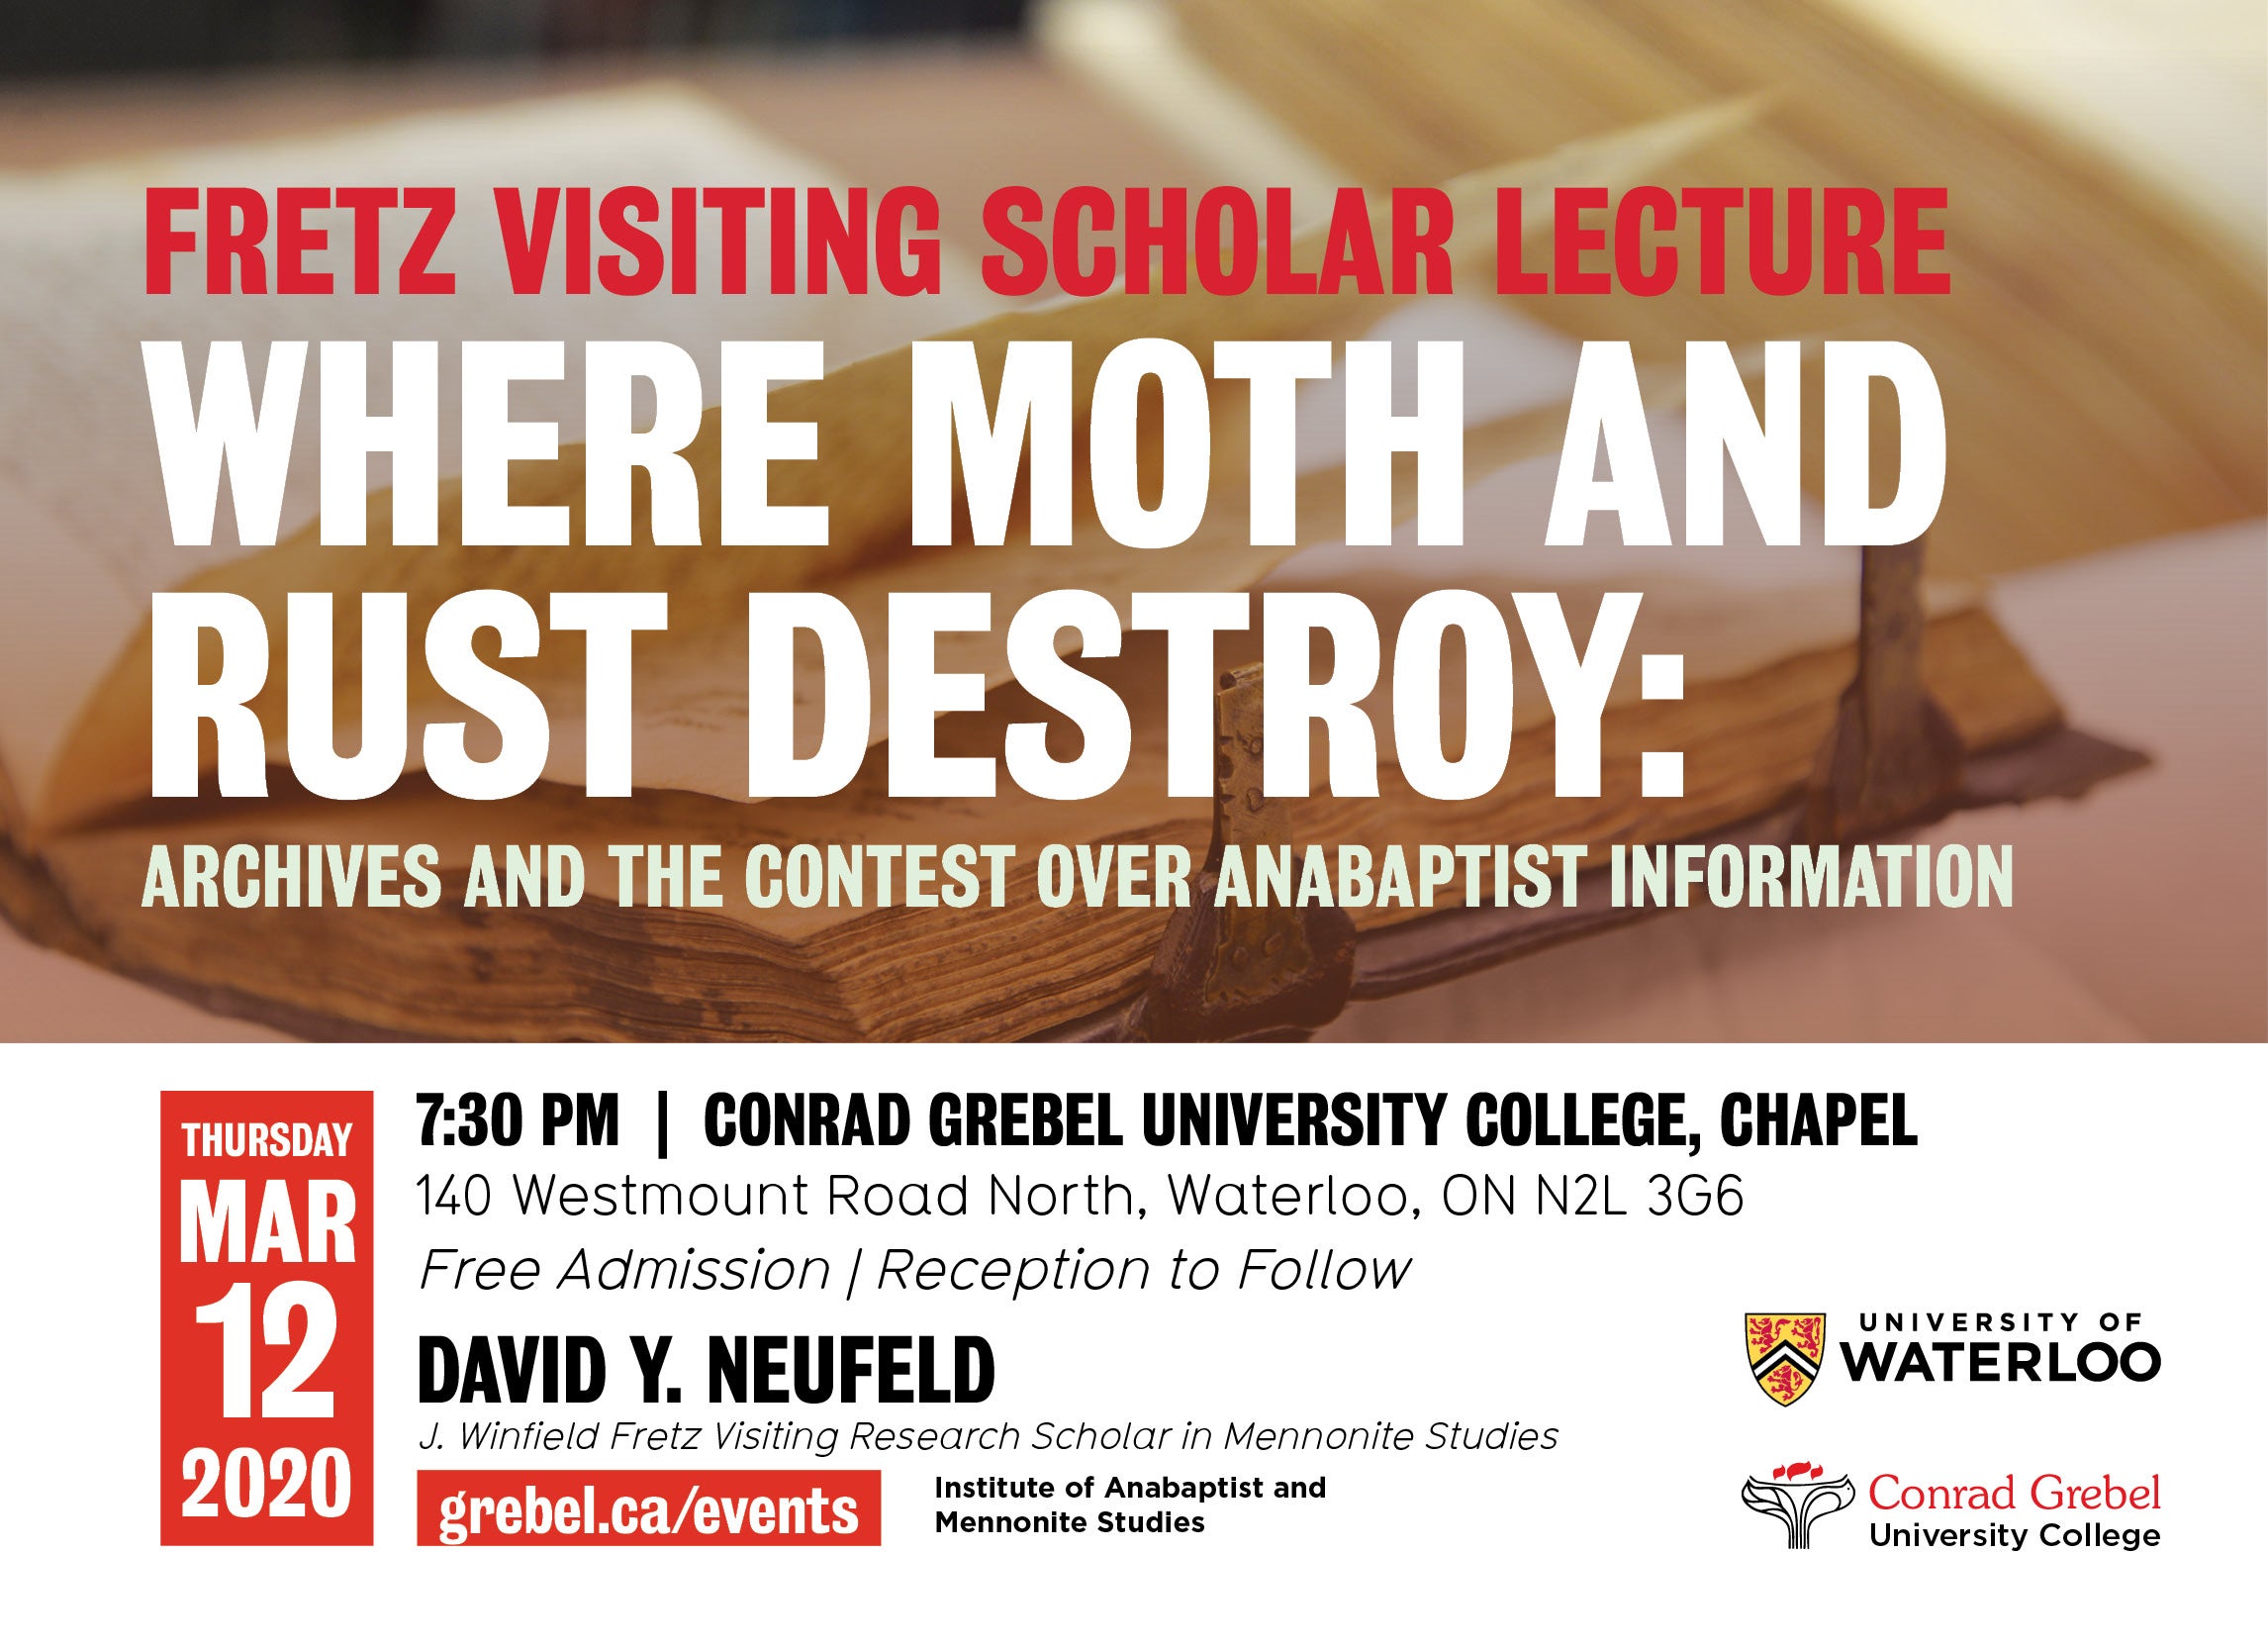 Invitation to Fretz lecture featuring an old book